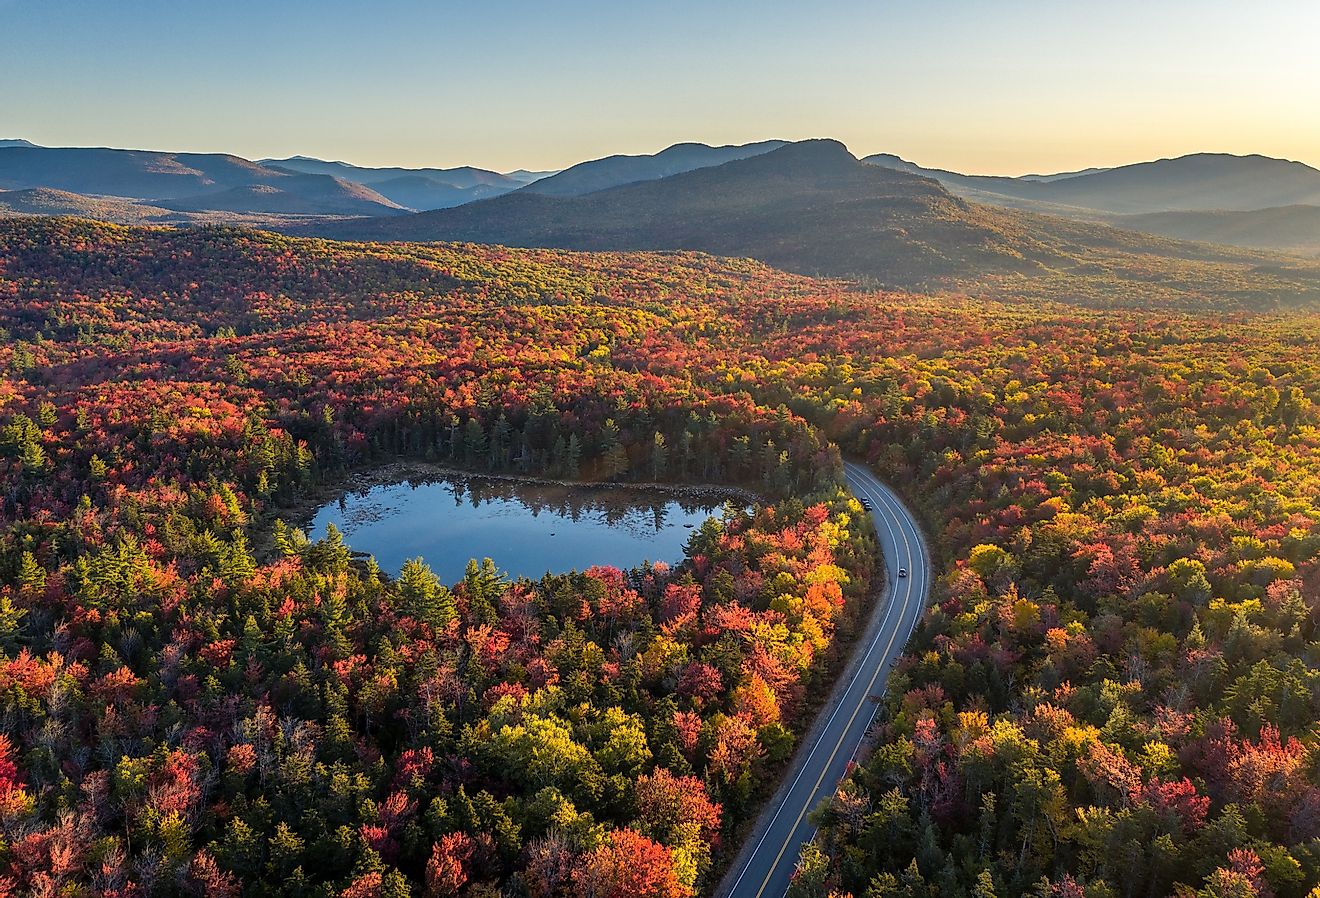 Overlooking the Kancamagus Highway, White Mountains, New Hampshire in fall.